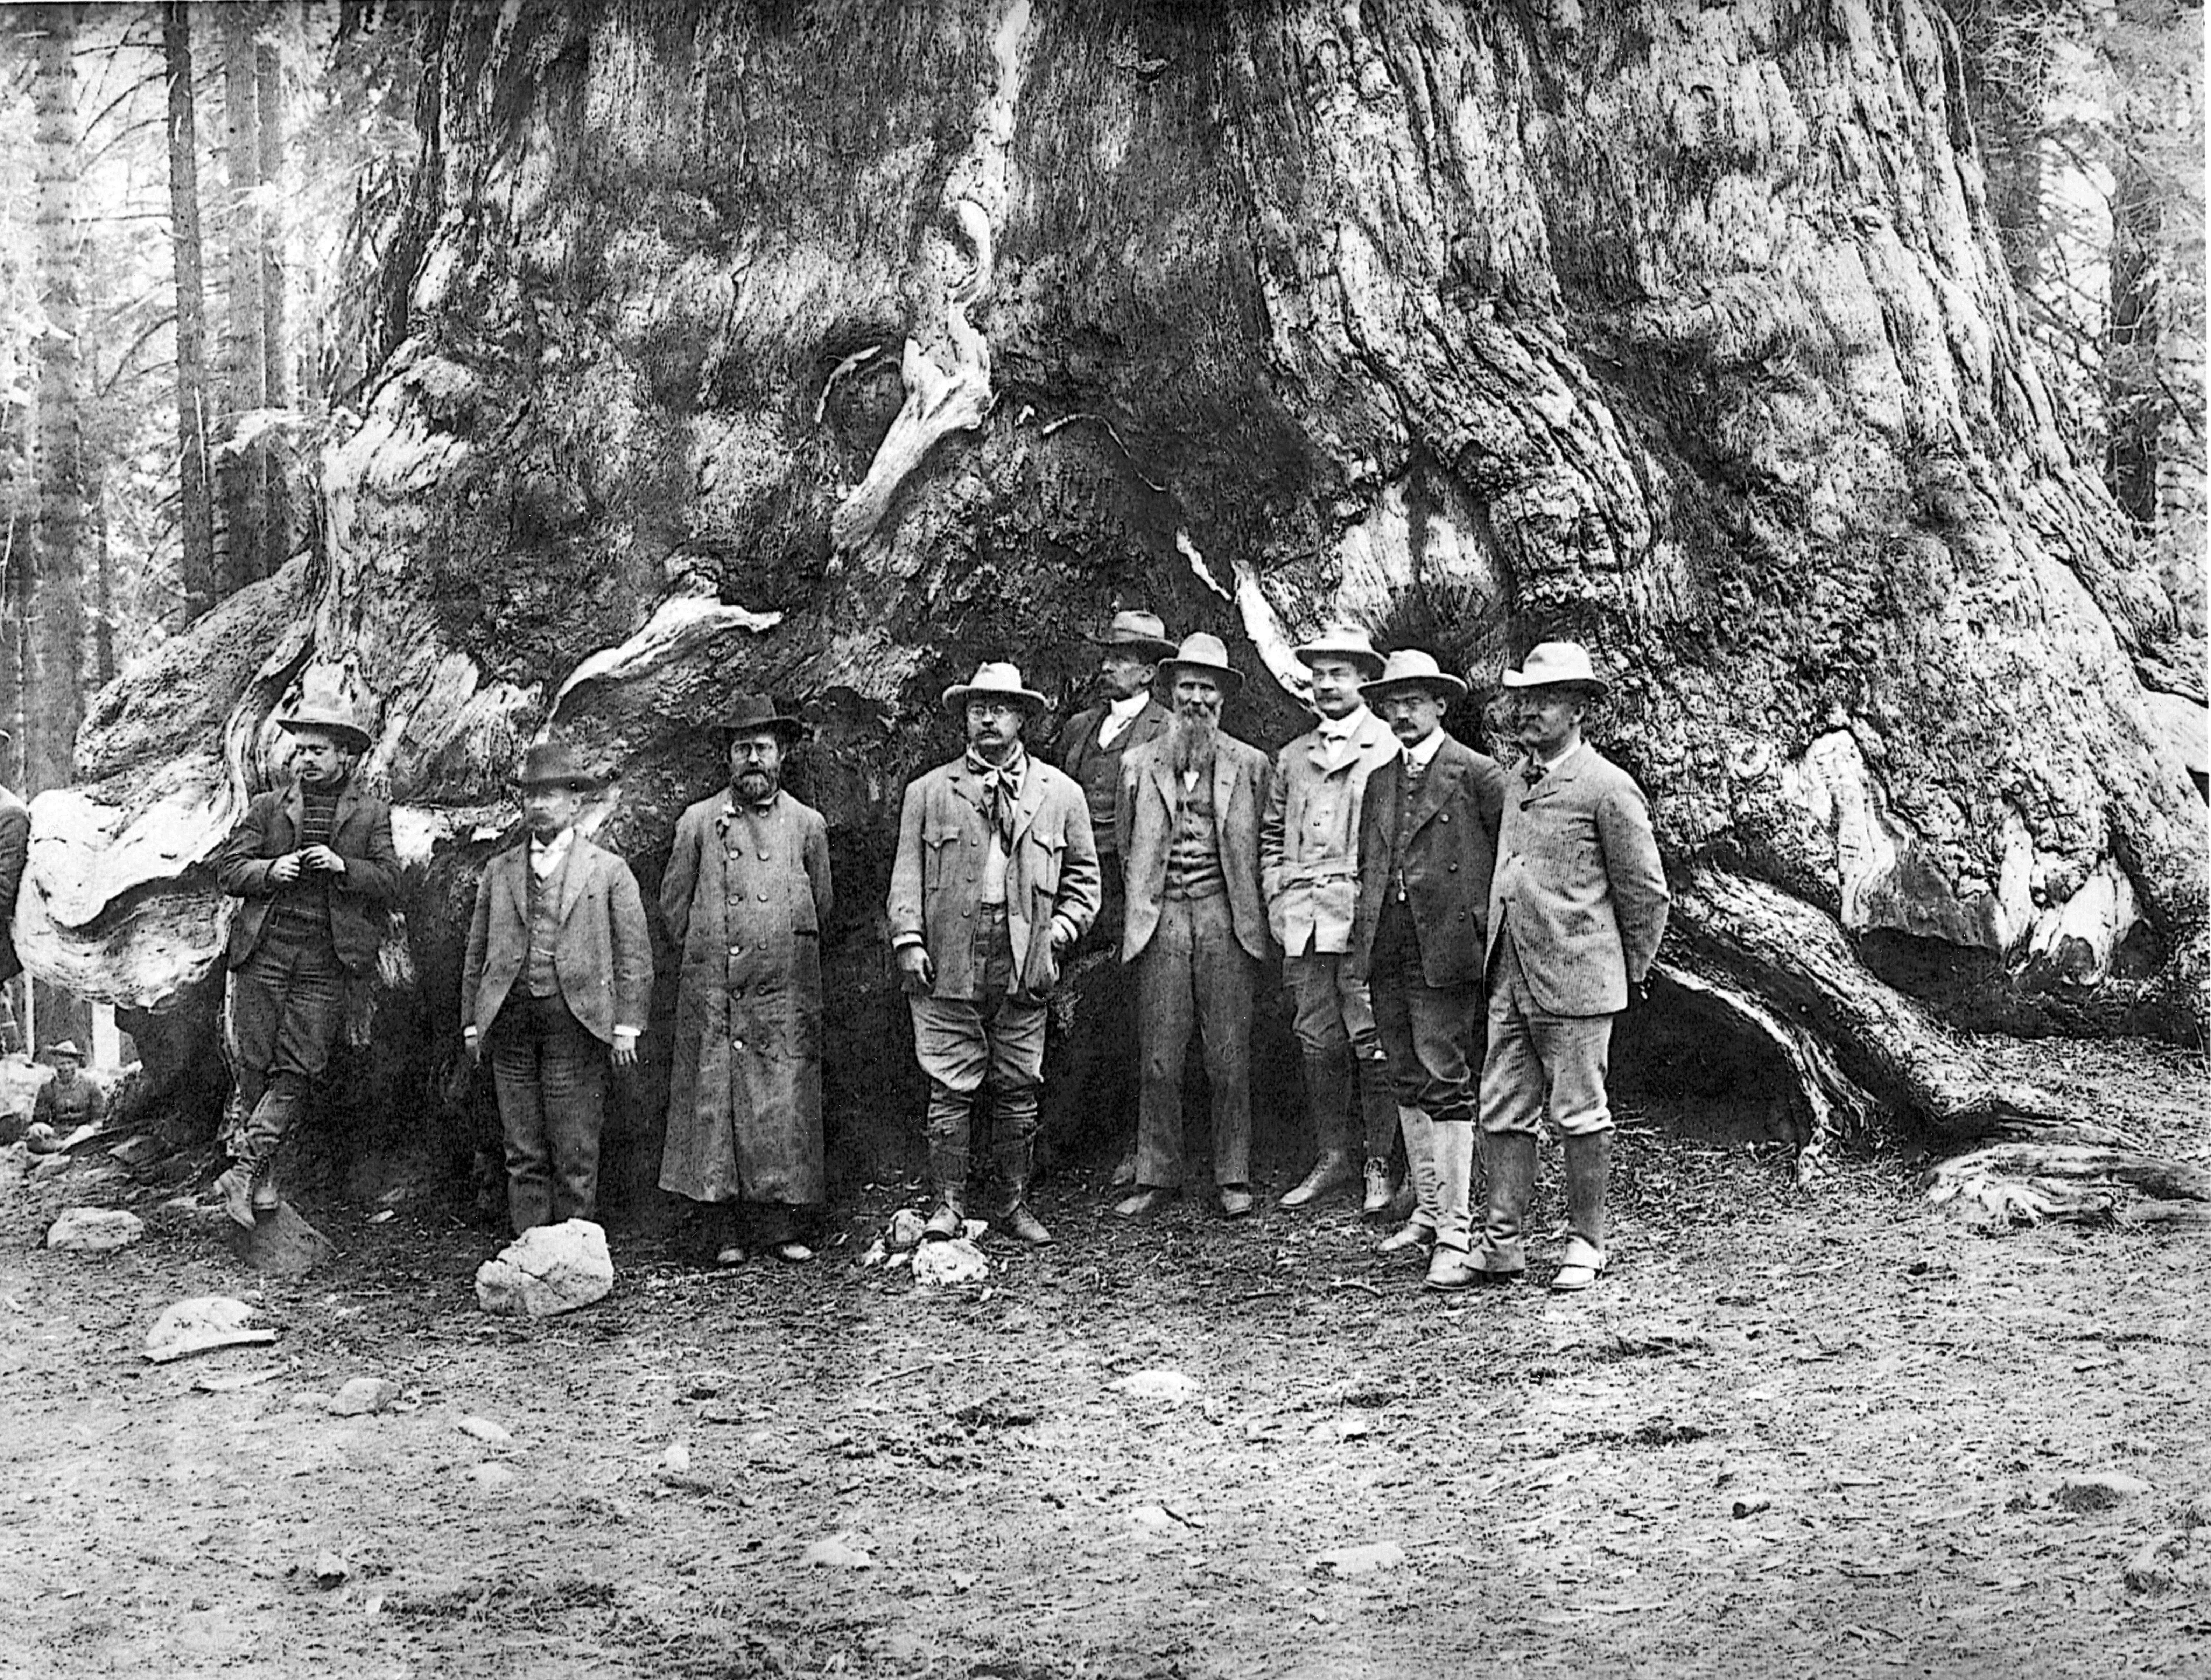 President Theodore Roosevelt and conservationist John Muir (to the President's left) in Yosemite Valley, California, 1903